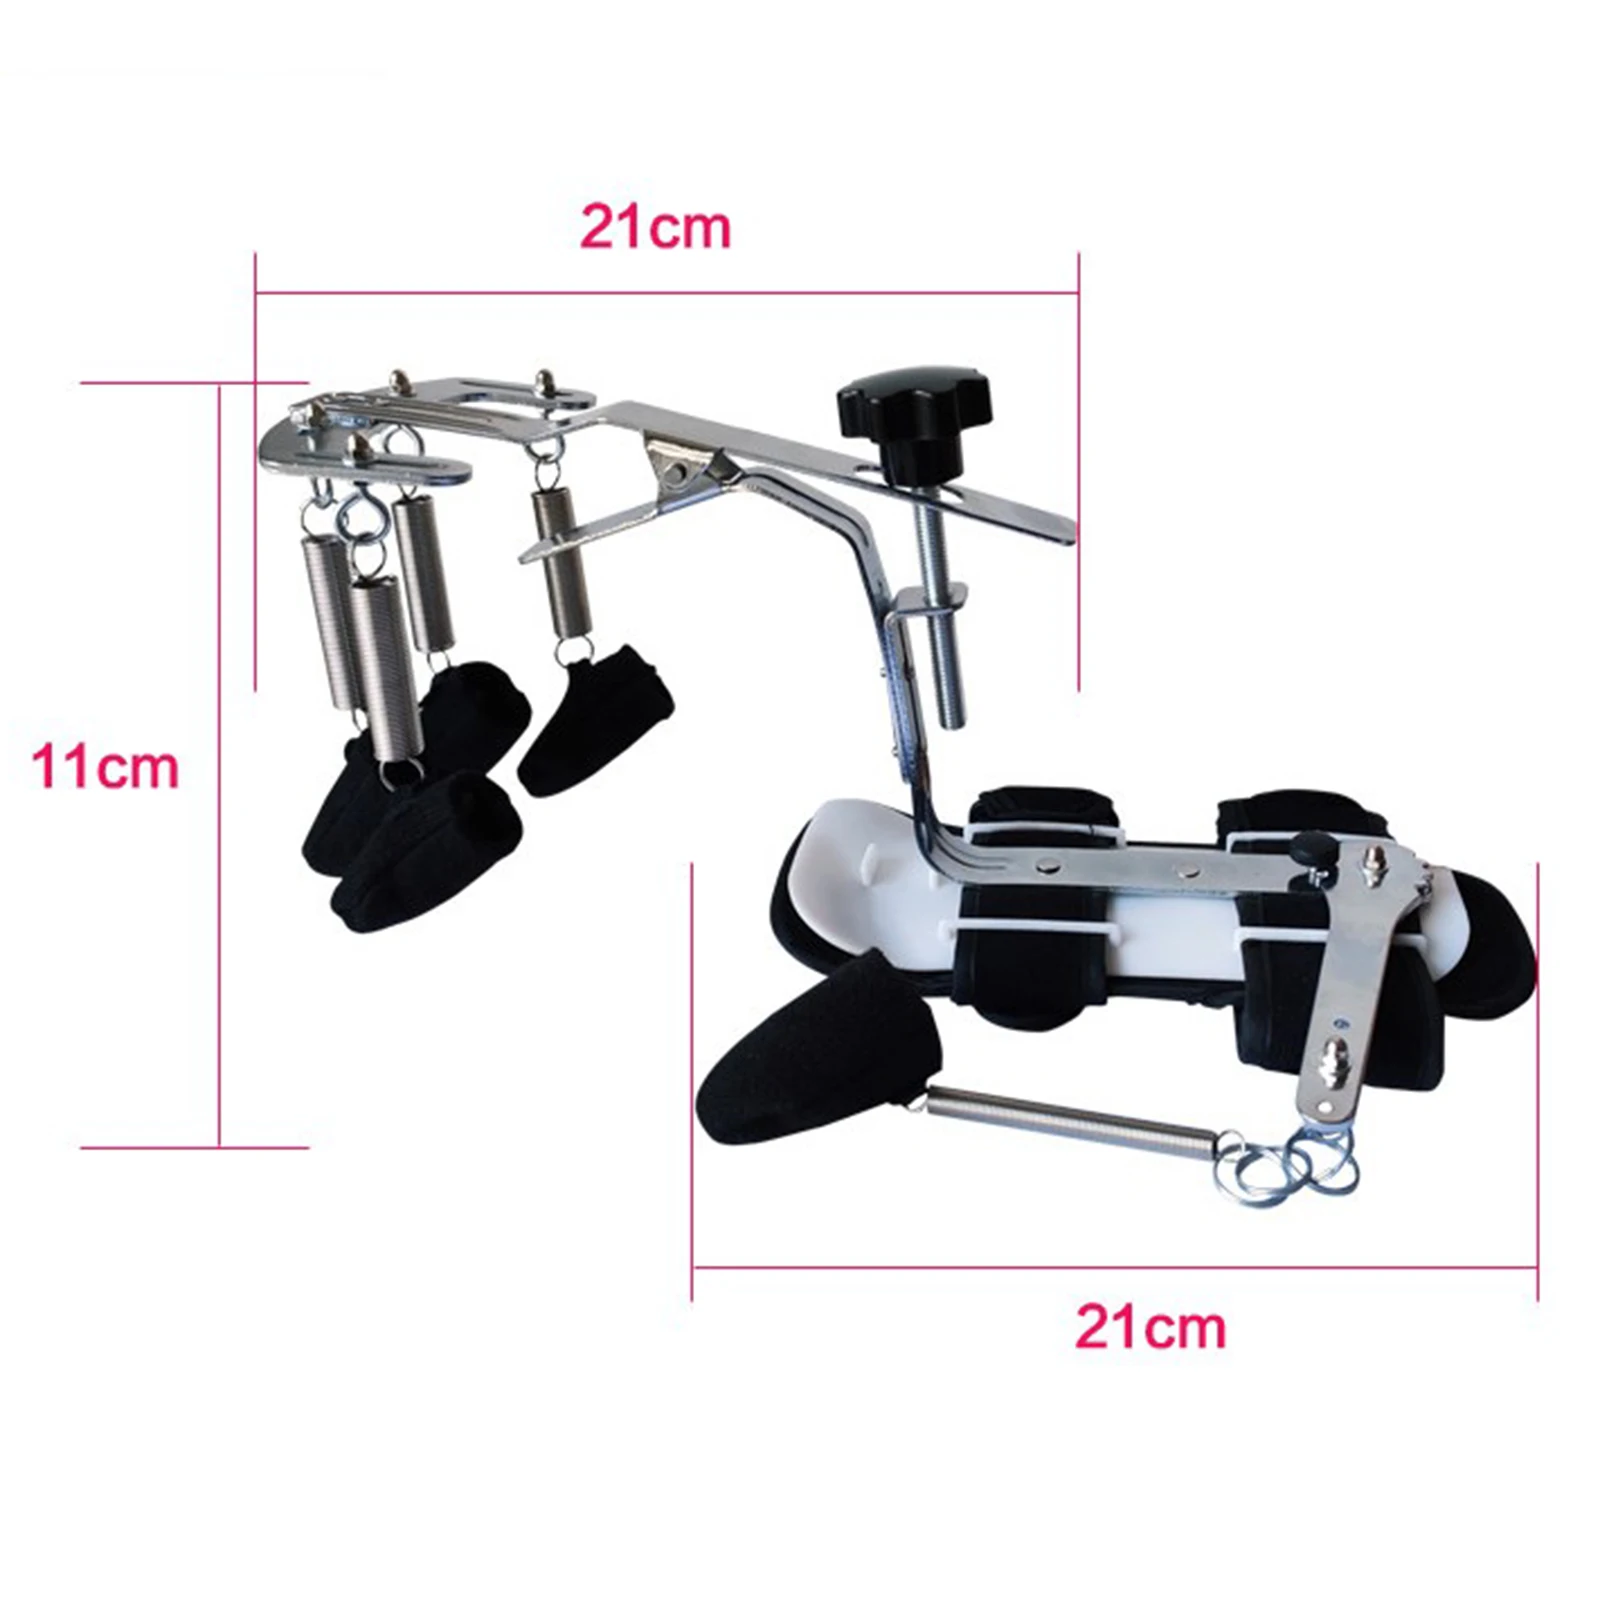 Wrist Finger Training Device Orthosis for Stroke Hemiplegia Guitar Fingers Muscle Tendon Repair Relief Stretcher Arm Workout